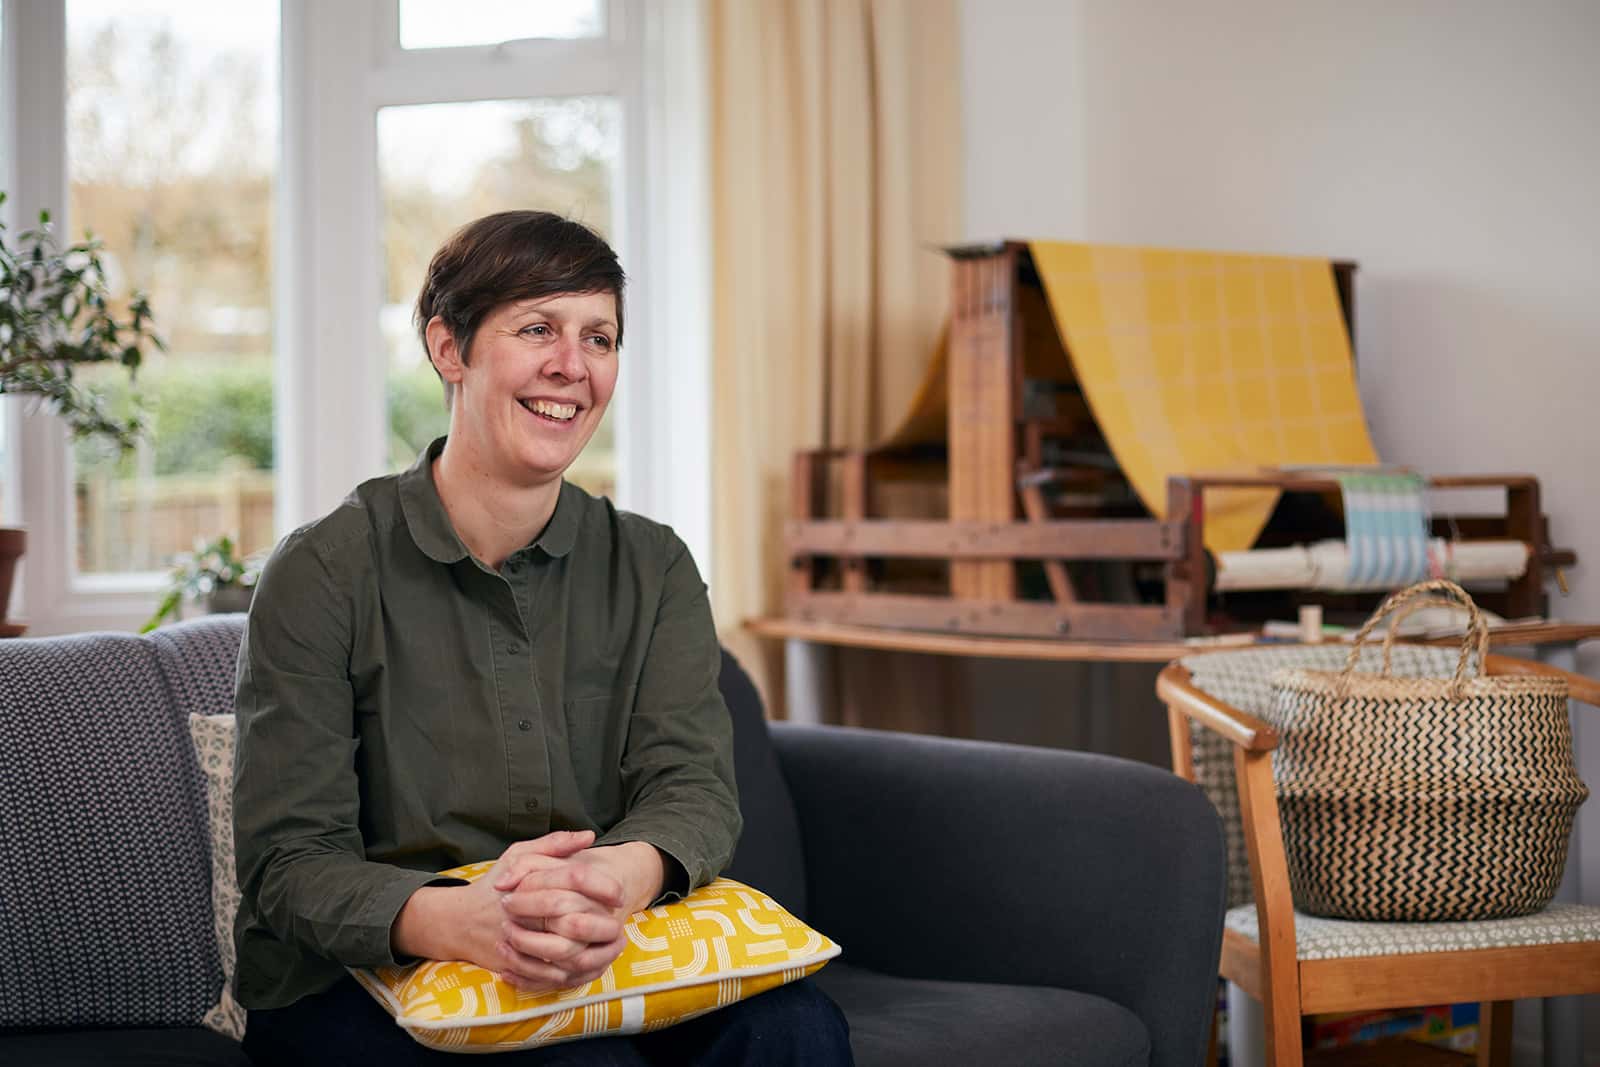 Kate Farley, Course Leader of BA Fashion and BA Textile Design sat in her home-studio in front of a loom